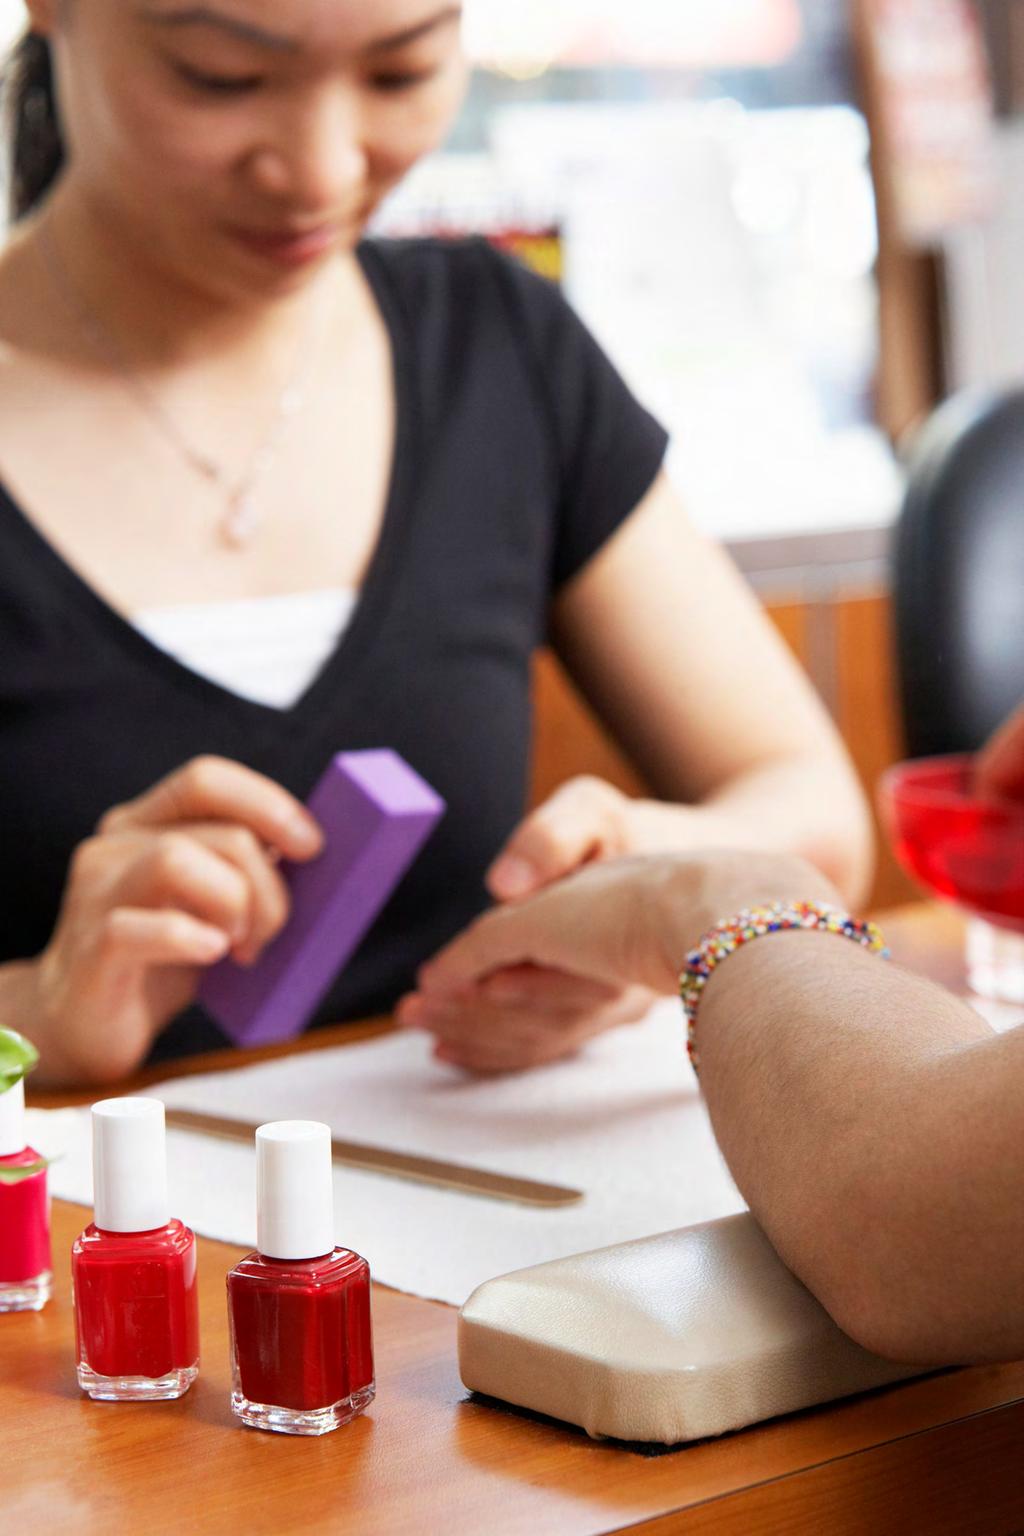 Health Hazards in Nail Salons More than 375,000 nail technicians work in salons across the United States and face possible health hazards every day.